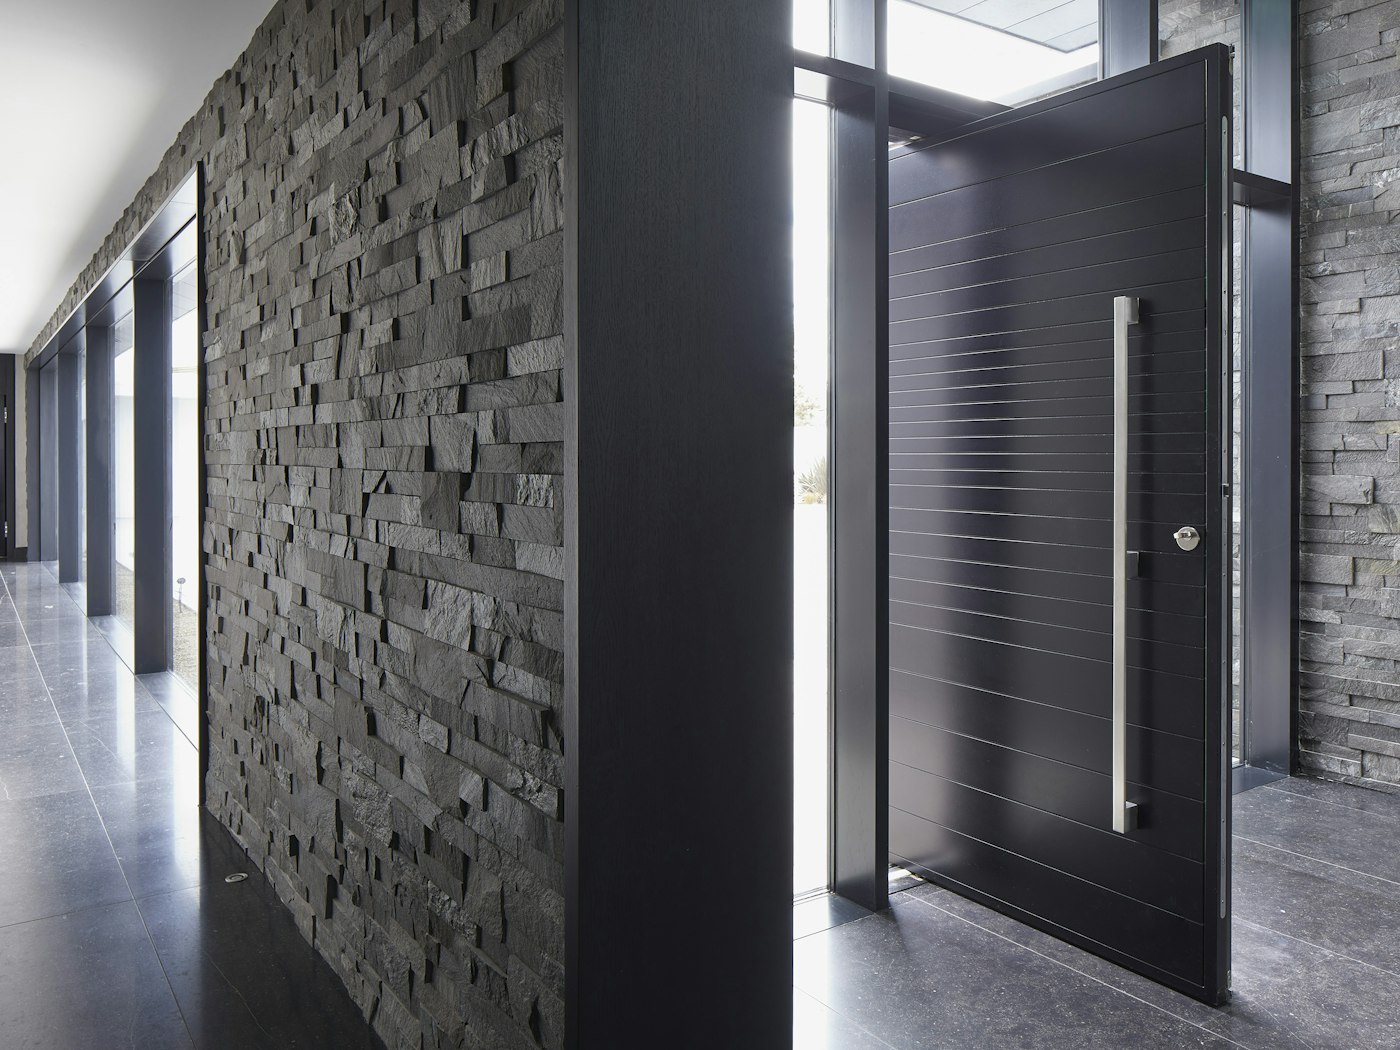 This Neo pivot doorset sits well with the dark tiled floor and the dark grey stone cladding